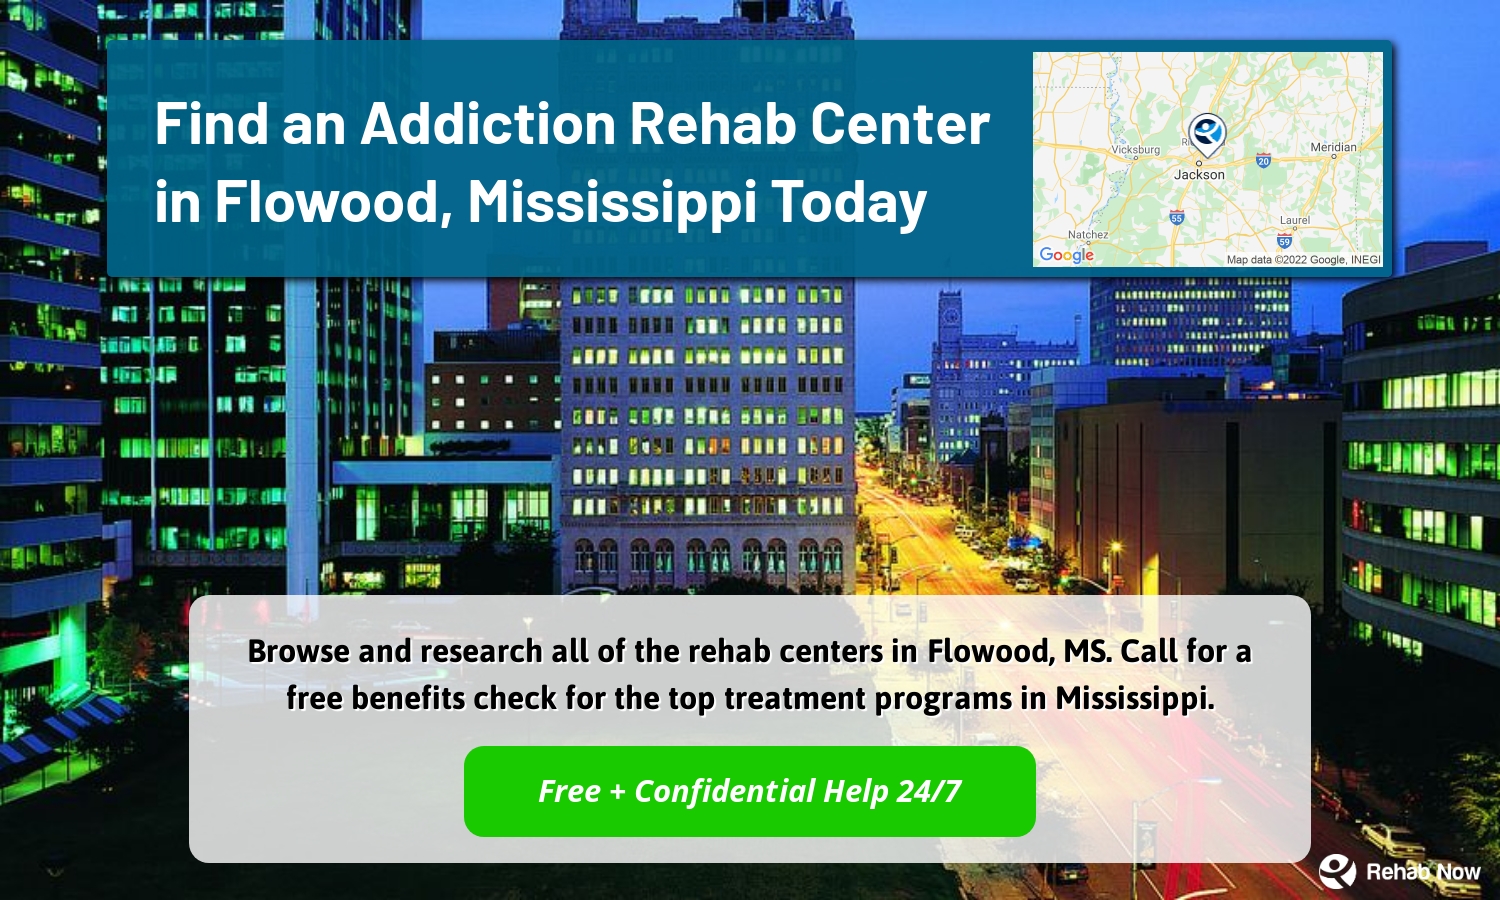 Browse and research all of the rehab centers in Flowood, MS. Call for a free benefits check for the top treatment programs in Mississippi.